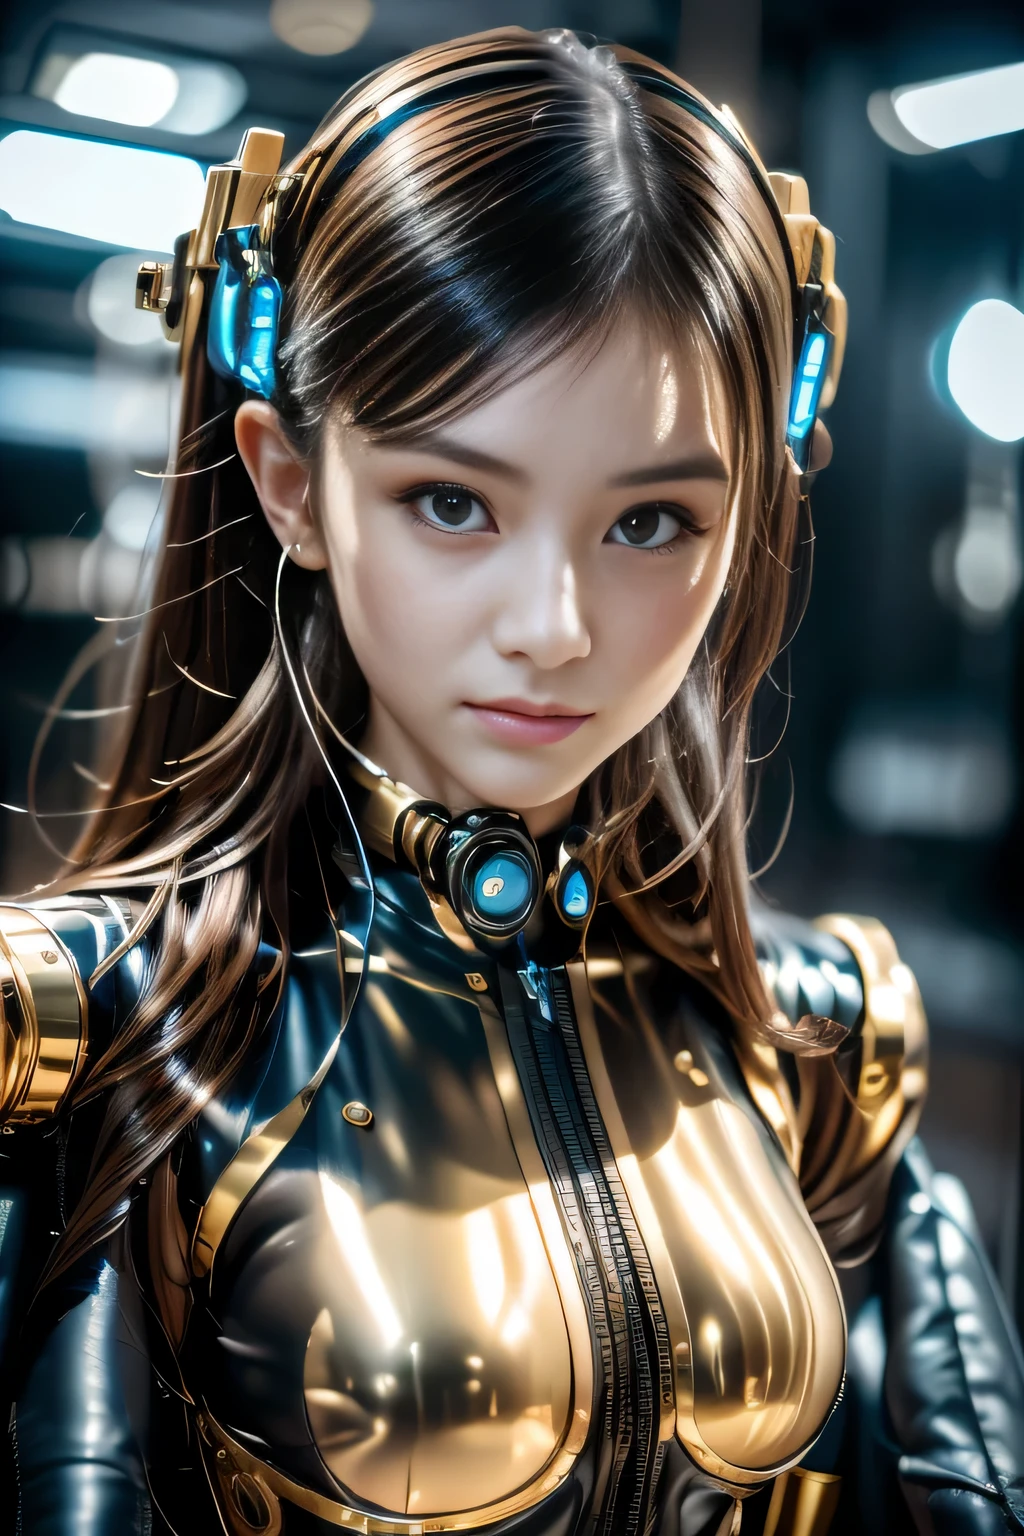 (masterpiece:1.3), (8K), (highest quality:1.4), (UHD:1.2), (realistic:1.3), (Raw photo), (1cyborg girl), (Ultra high definition), (detailed face), very perfect beautiful and cute face, (fine hair), beautiful hair, bangs, (symmetrical eyes:1.3), (fine eyes), (fine skin), realistic skin, shiny skin, ultra high resolution, (medium breasts), (slim body shape), (super model figures), 20 years, Japanese, 

( cyborg, android, gynoid cyborg body, perfect cyborg woman, machine arm:1.5, futuristic short headset ), Walking through the Cyber City